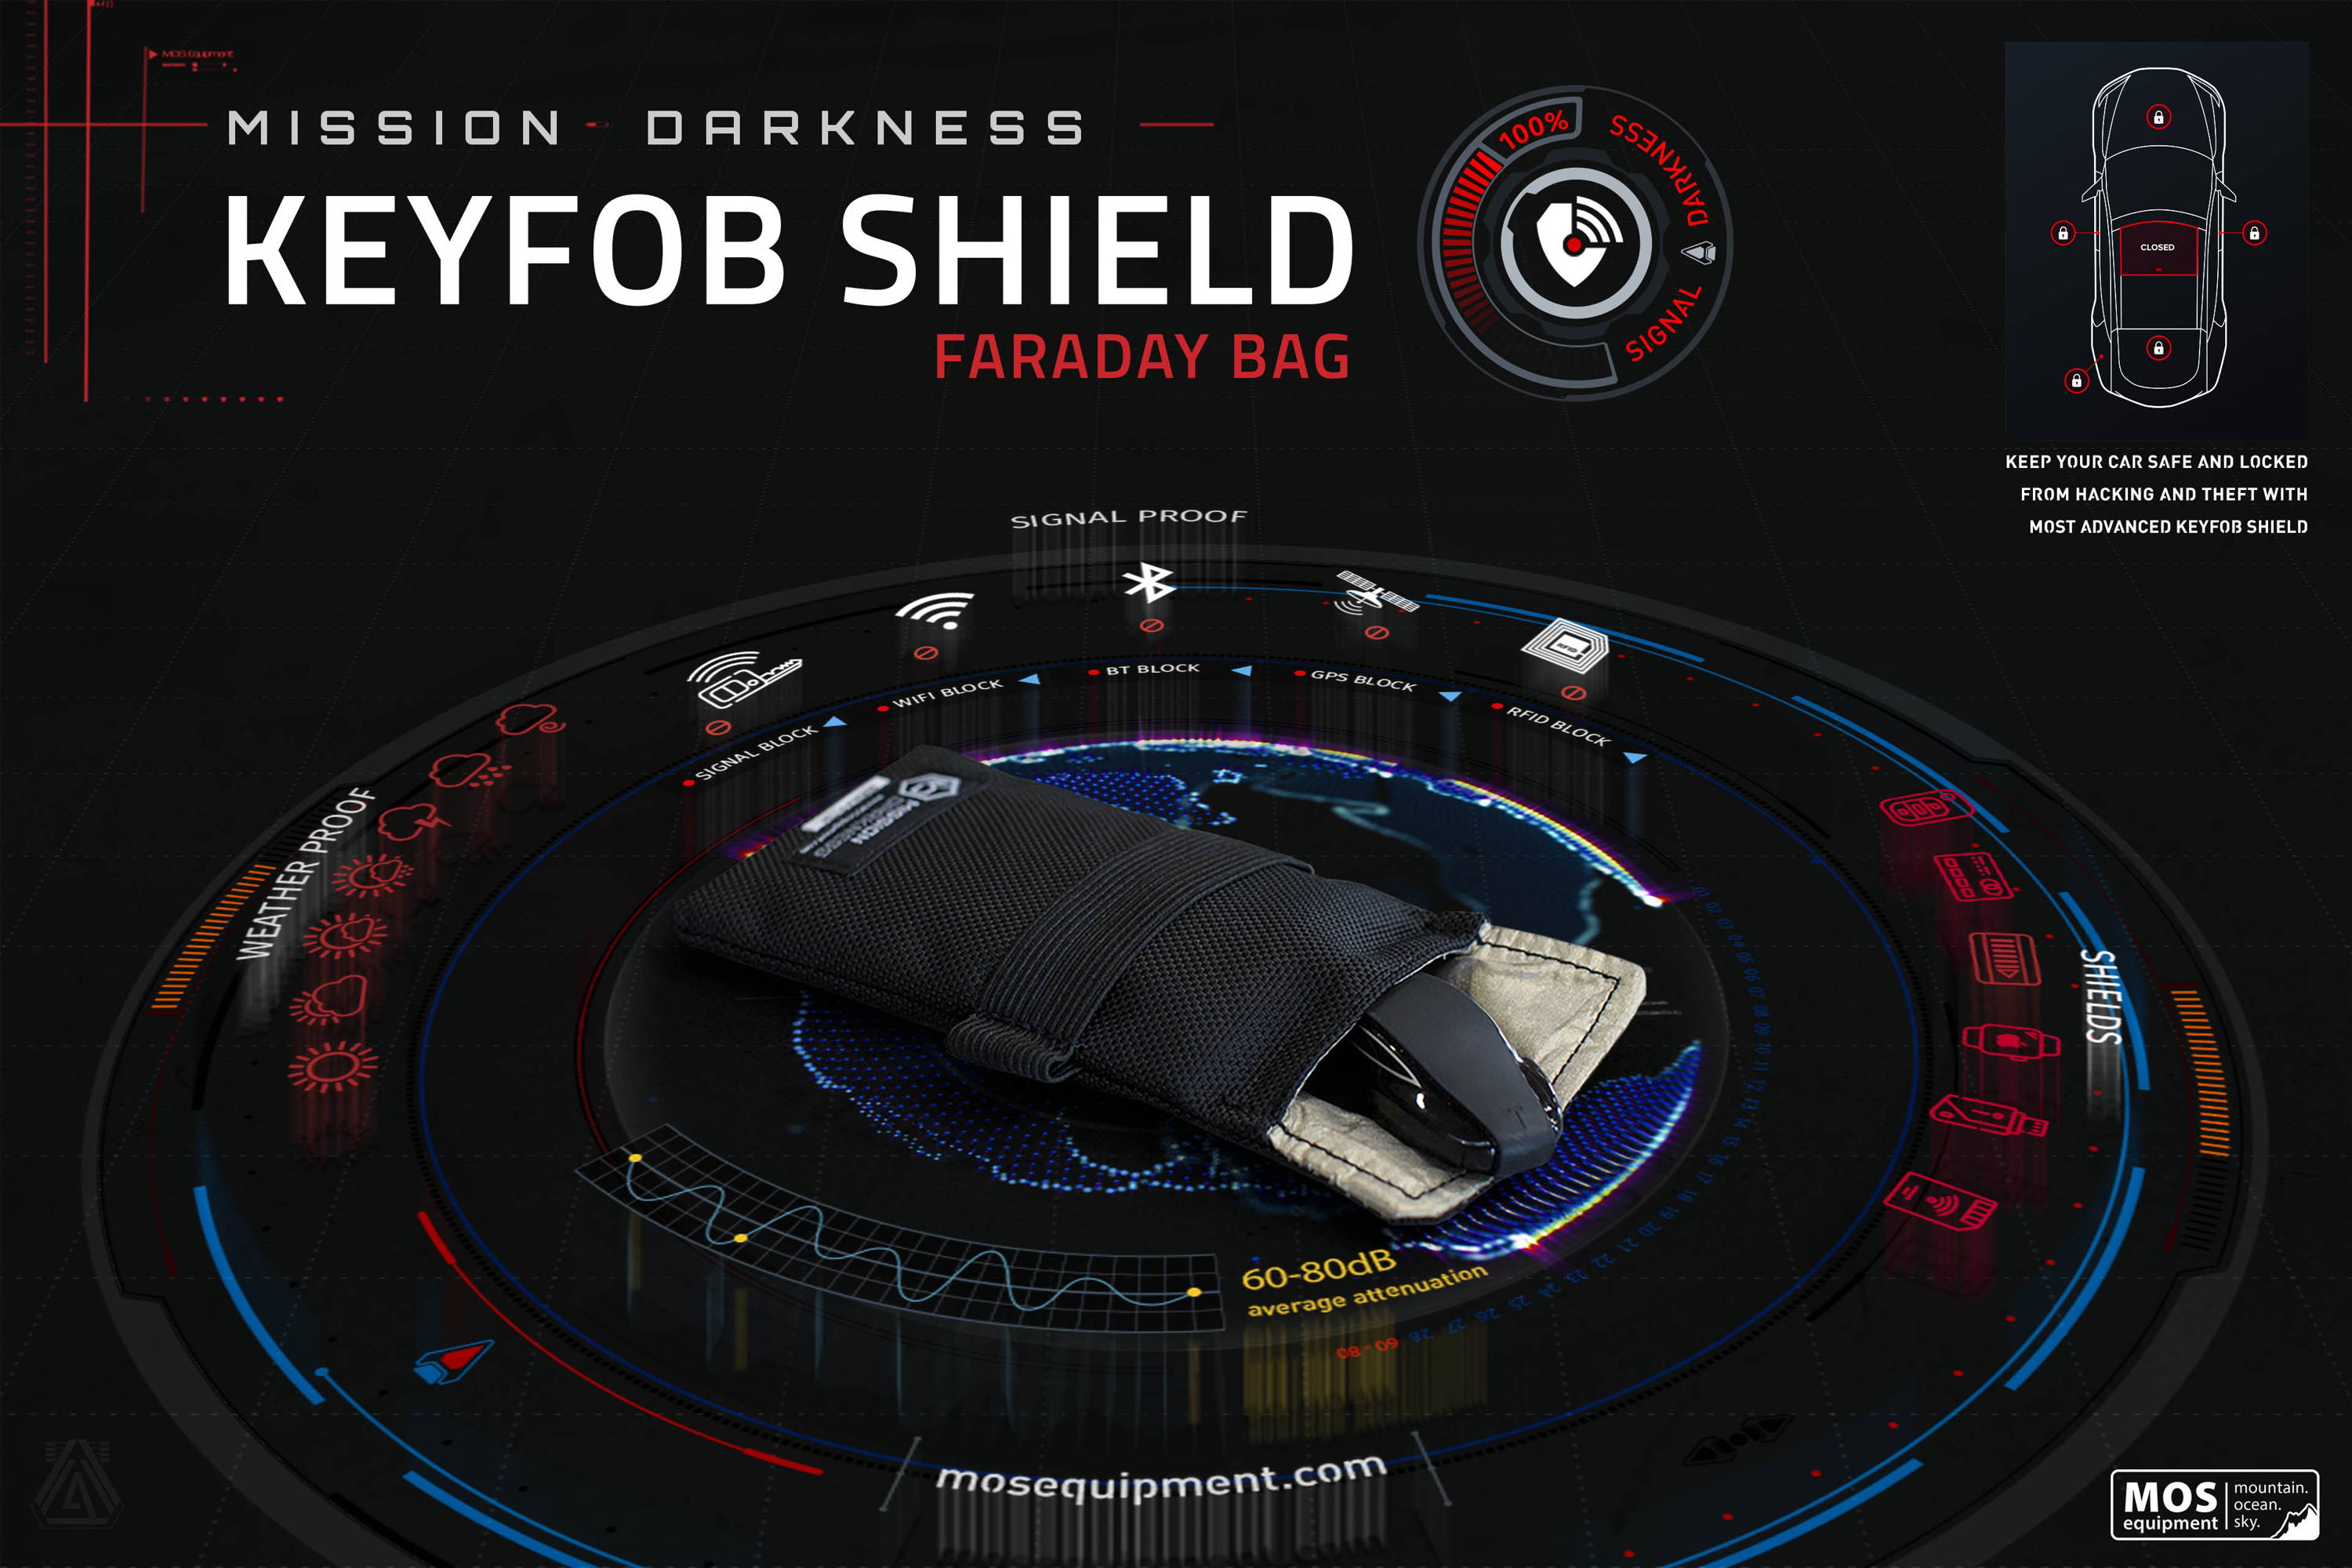 Mission Darkness keyfob faraday bag protects vehicles from relay hack remote access